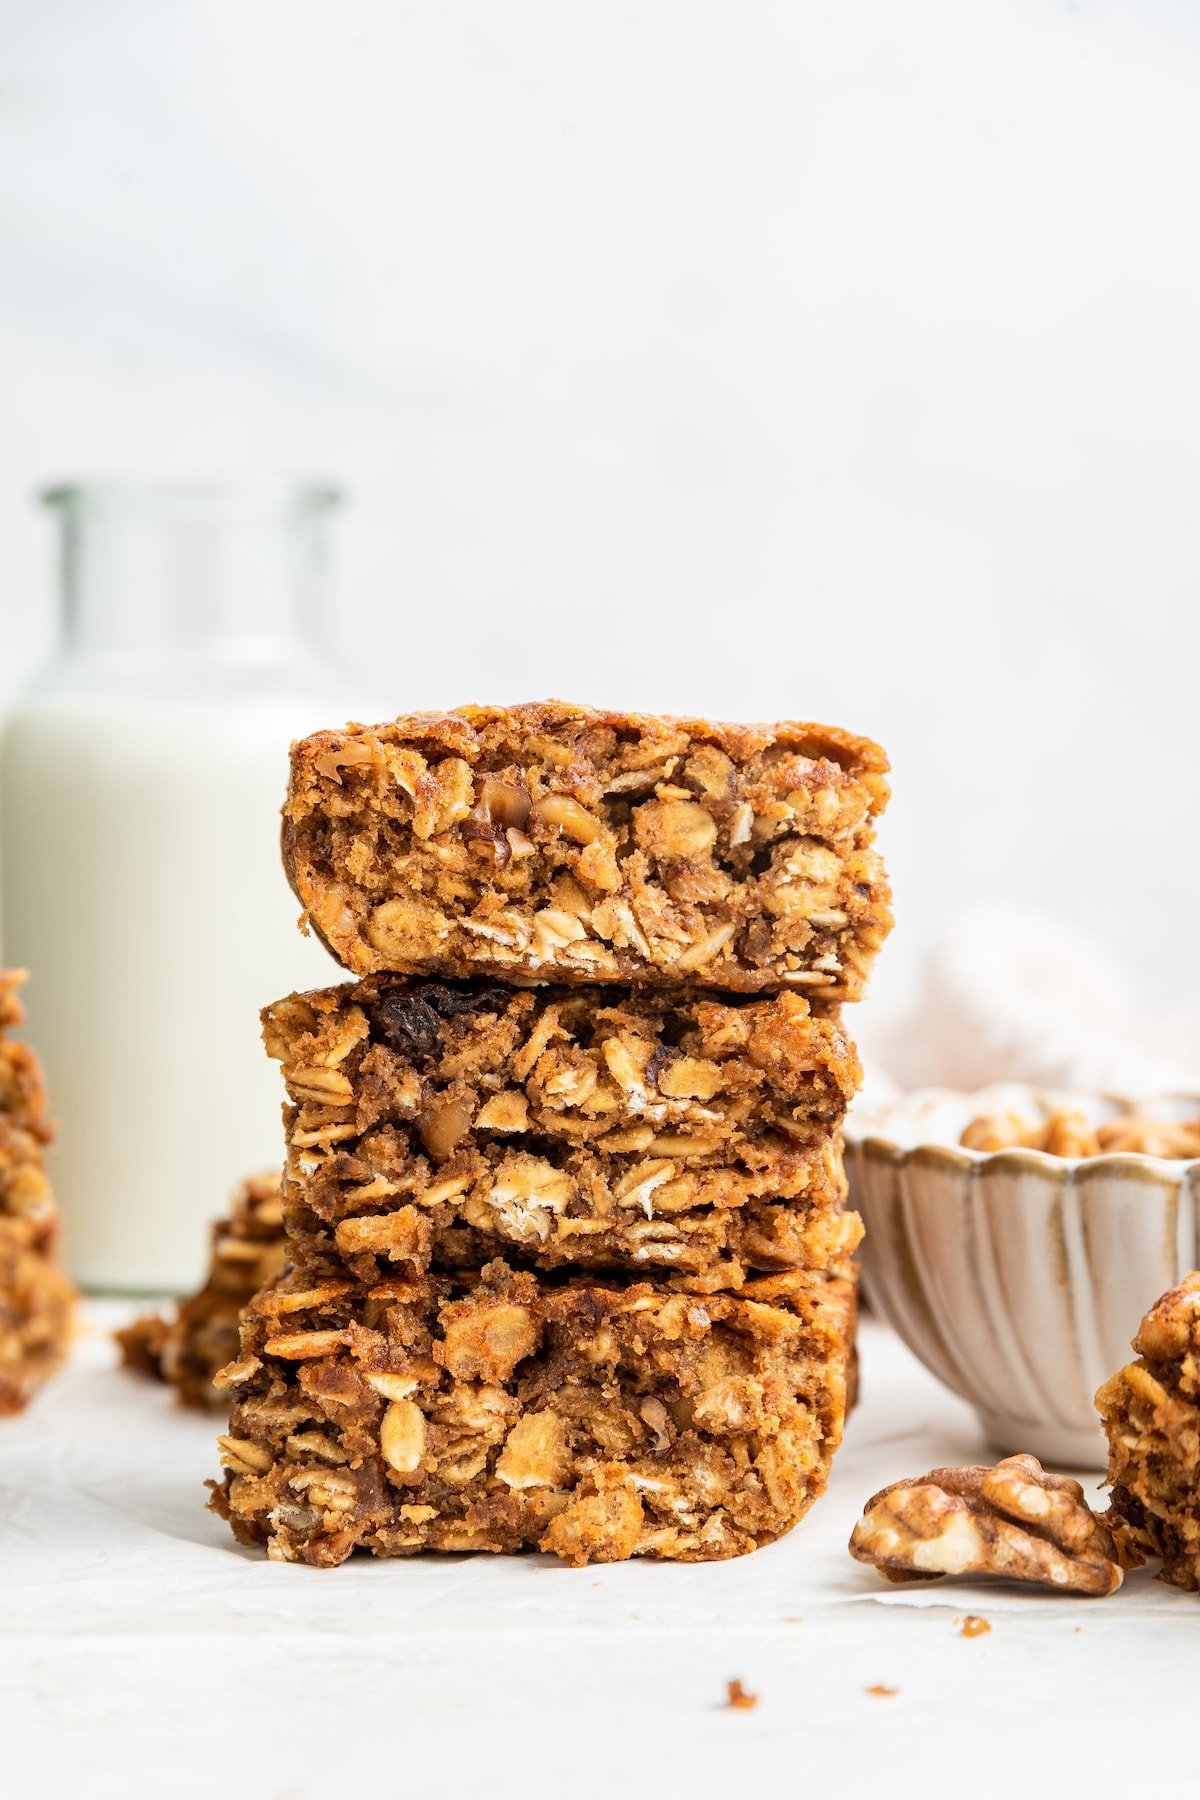 Three healthy banana oat bars stacked on one another.